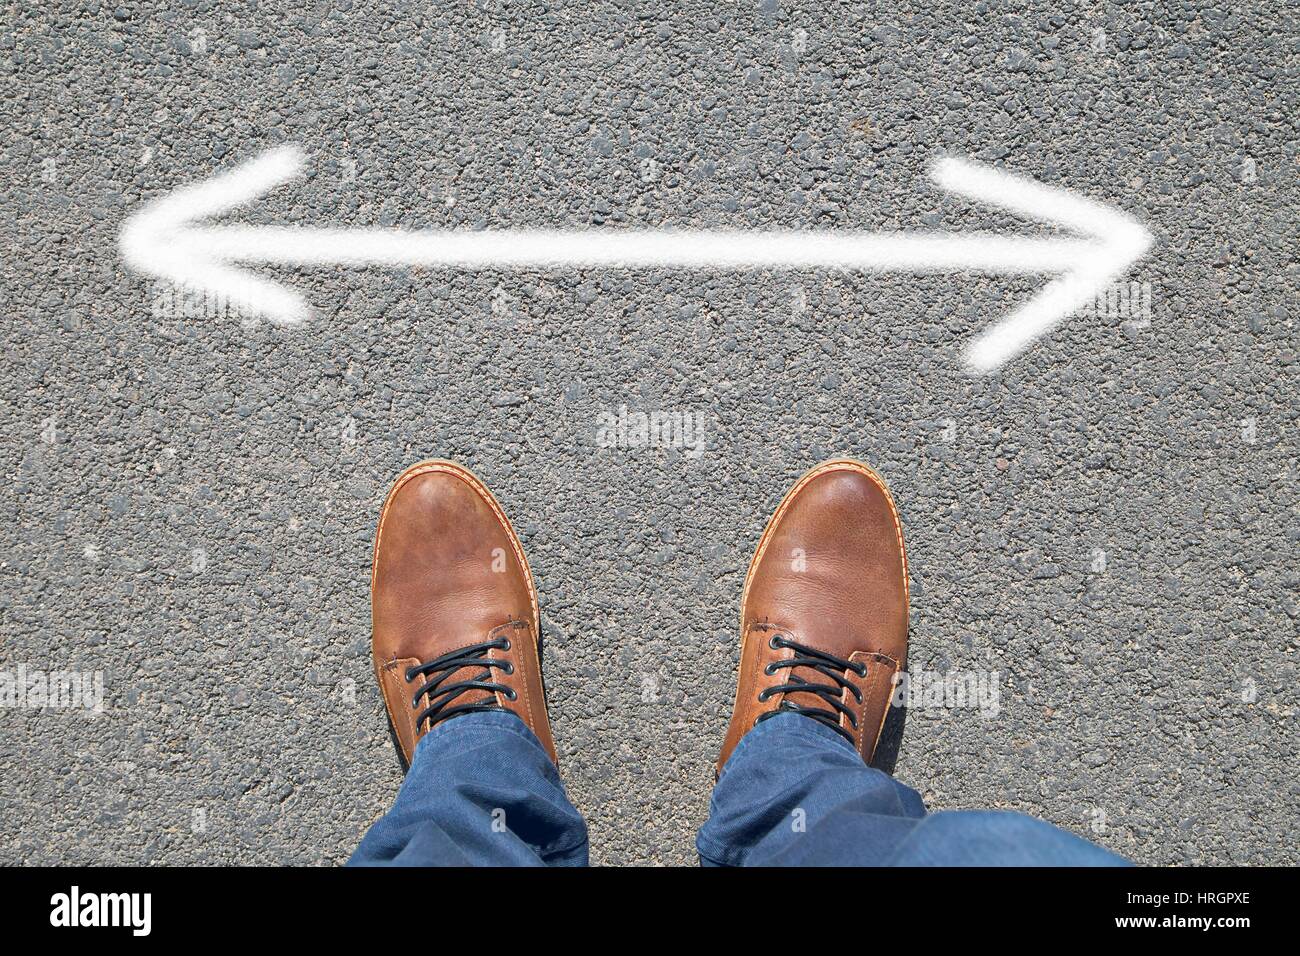 Feet on the street with text Stock Photo